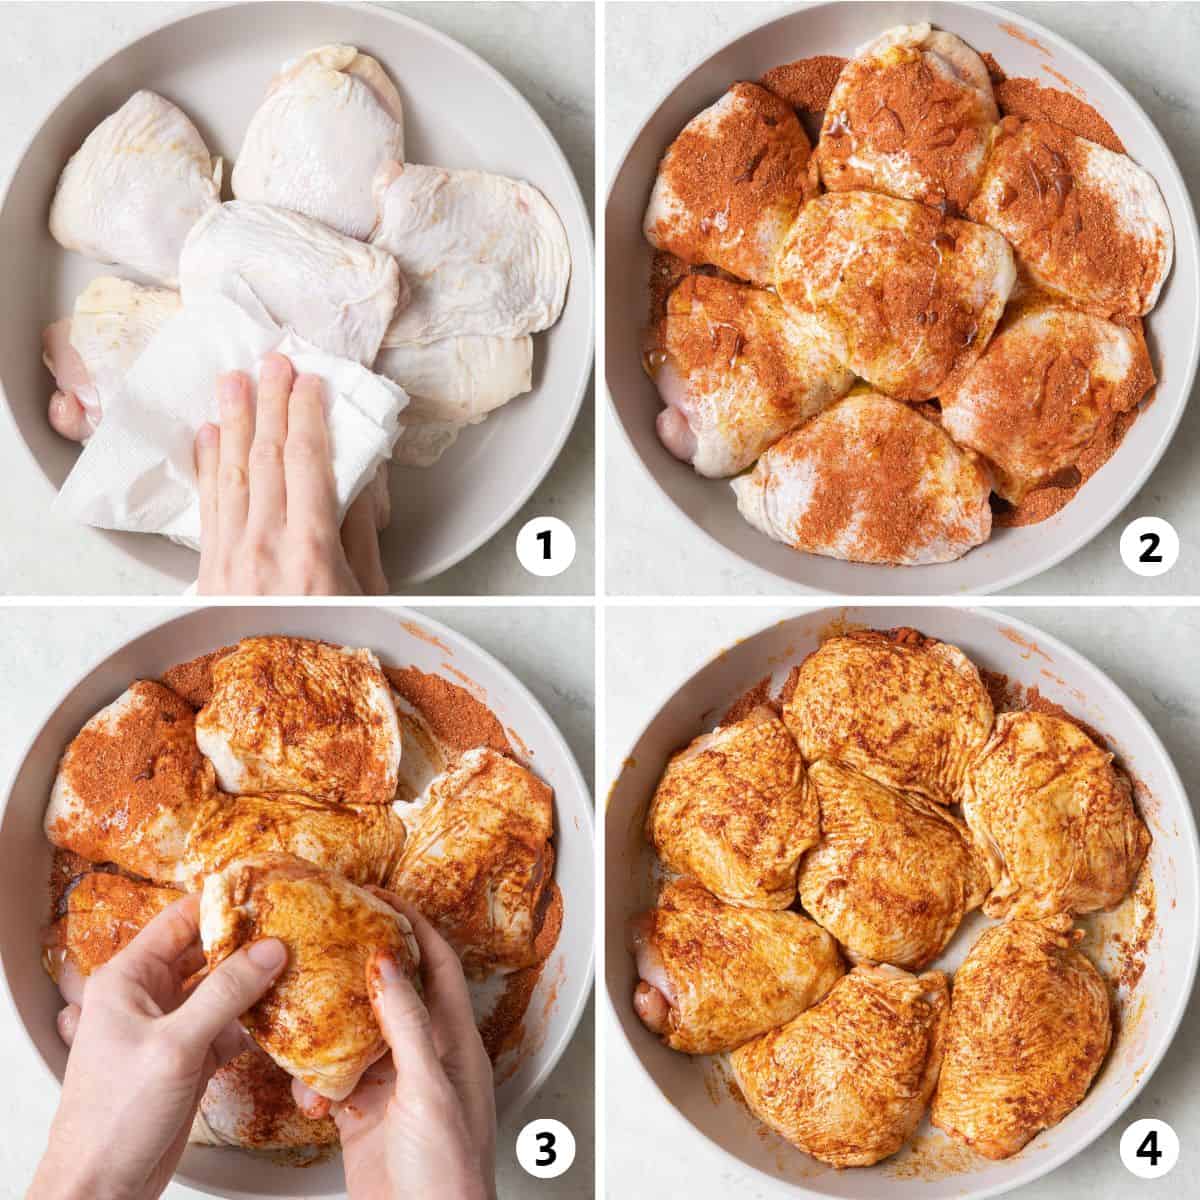 4 image collage seasoning meat: 1- paper towel patting chicken dry, 2- bbq seasoning sprinkled on top, 3- hands rubbing the oil and seasoning onto them, 4- after completely coated.